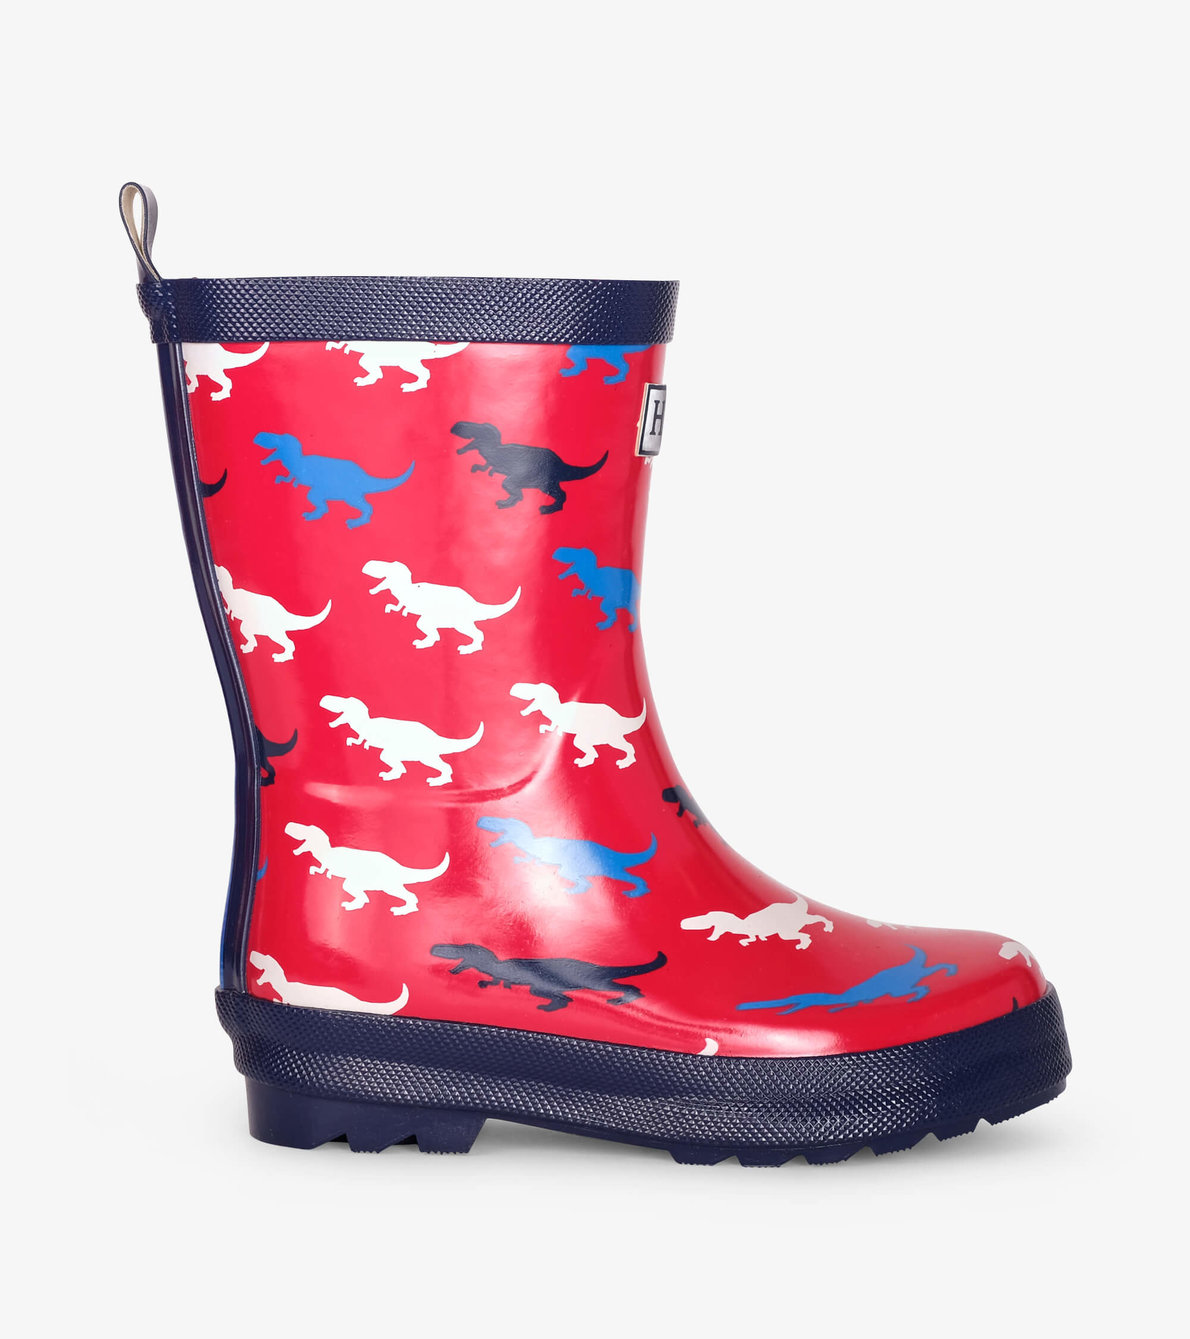 View larger image of T-Rex Silhouettes Shiny Rain Boots